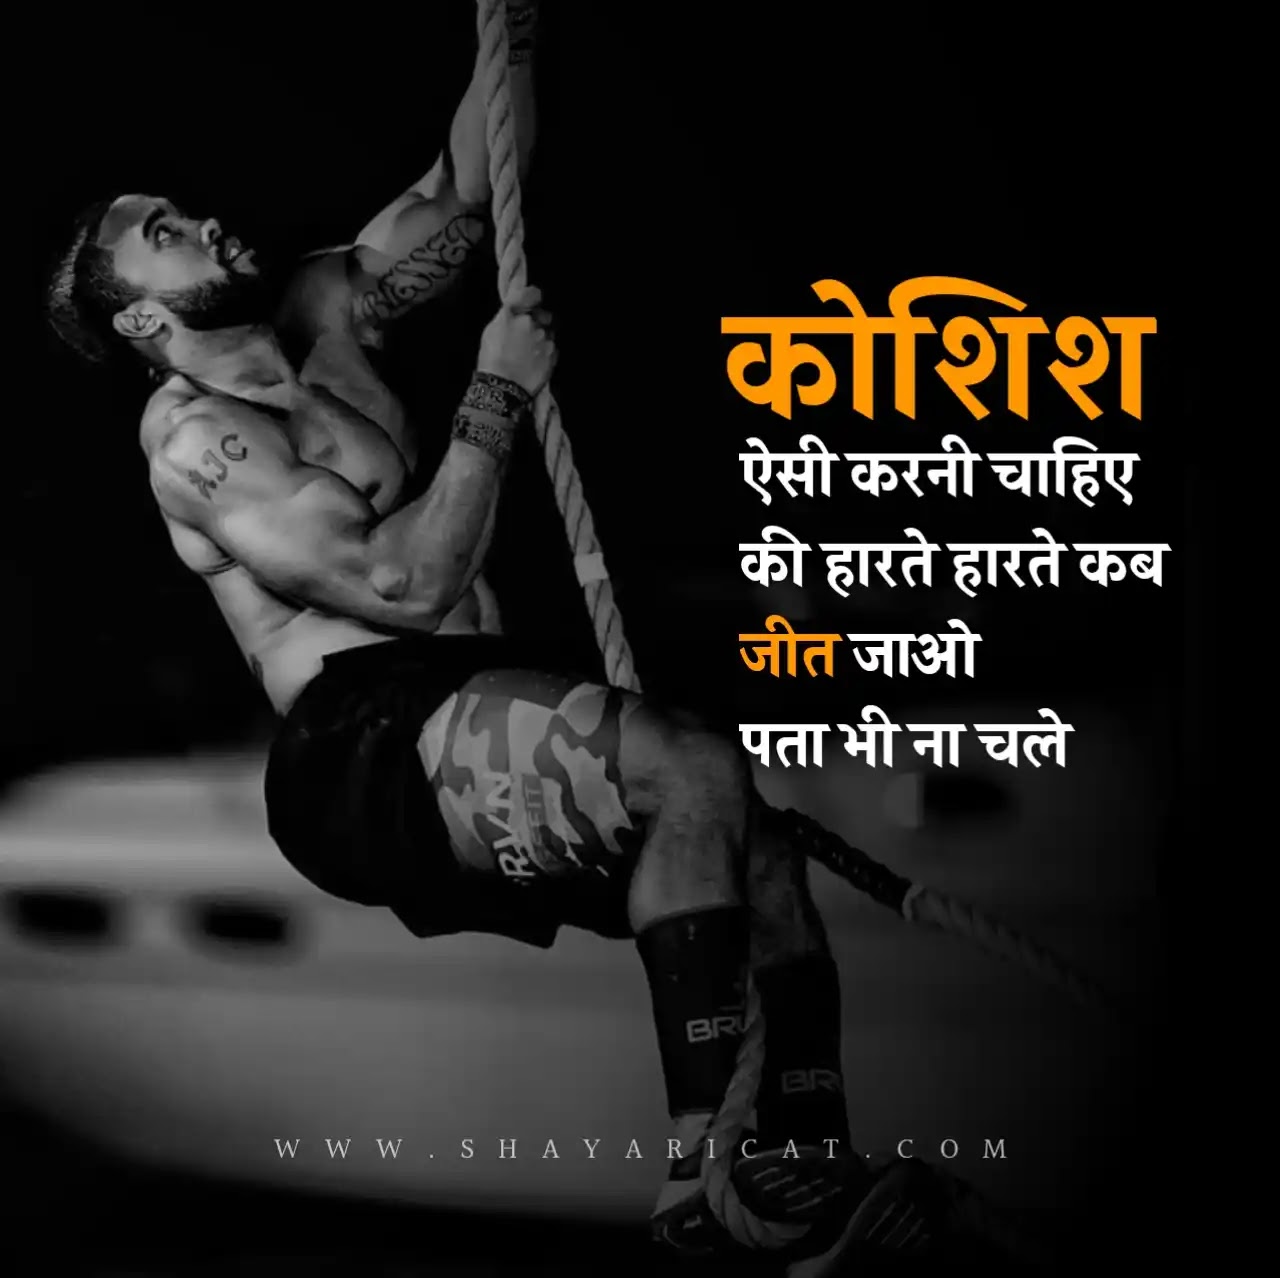 50+]Best Motivational Quotes in Hindi | मोटिवेशन ...